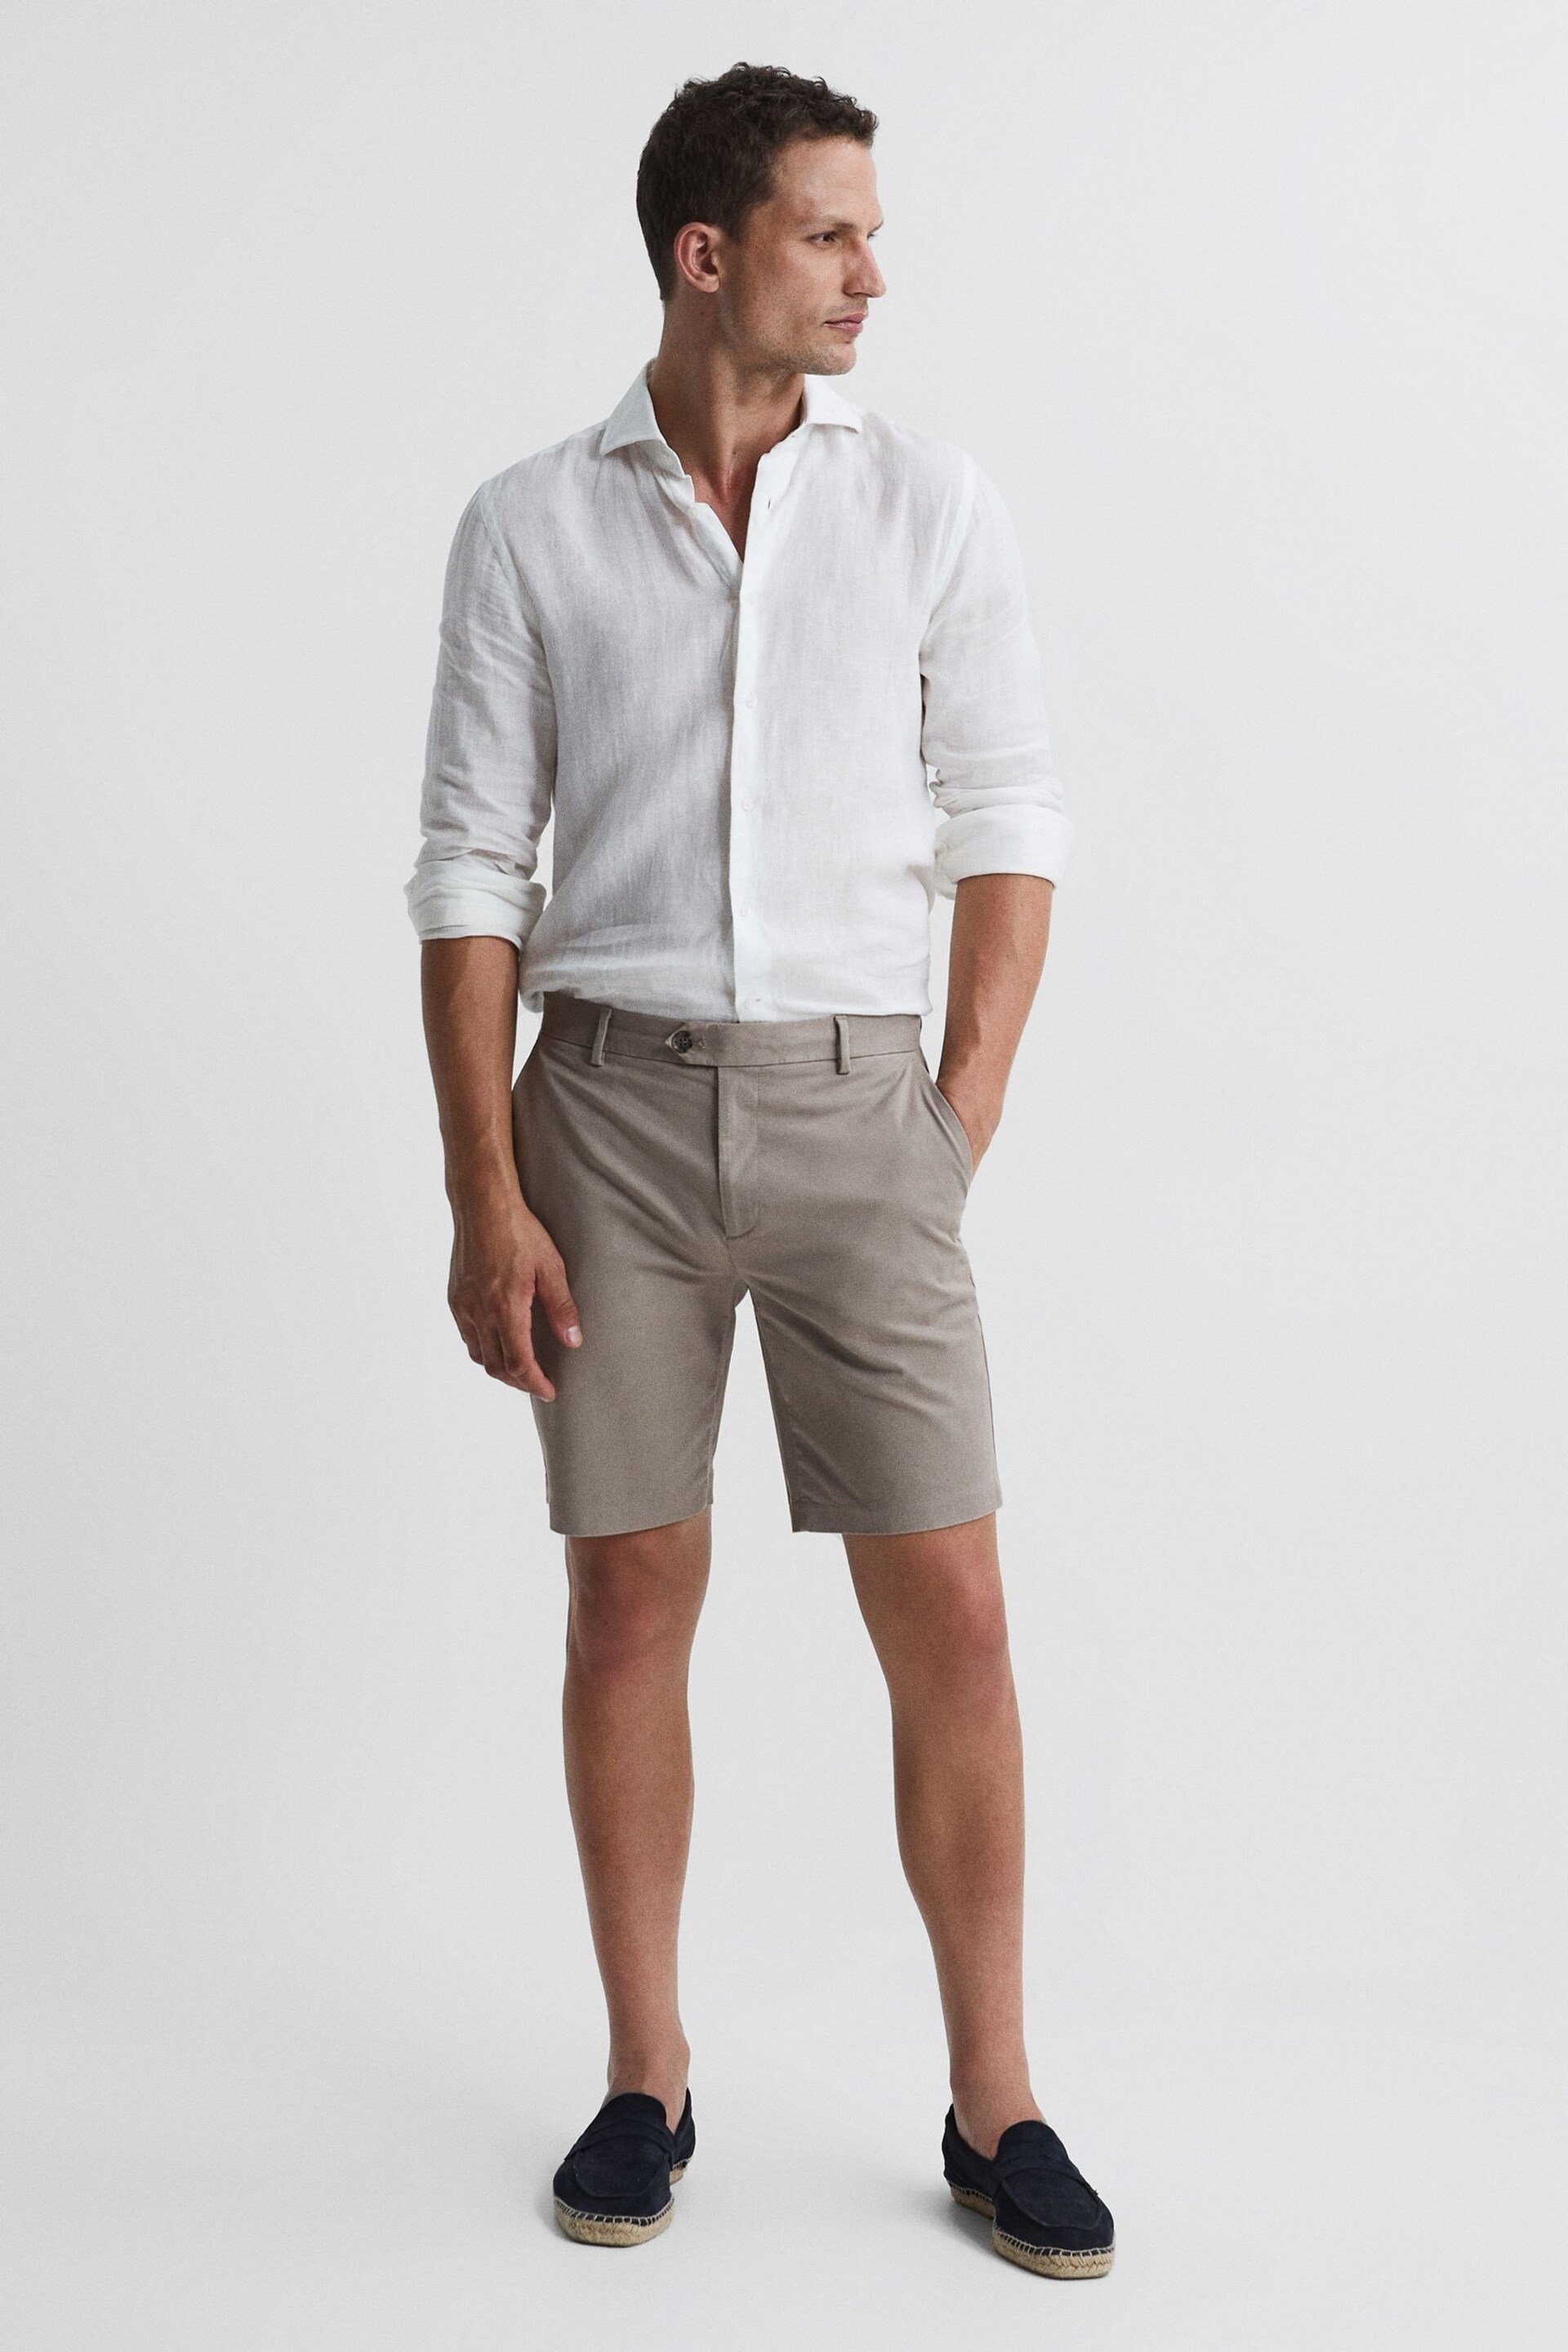 Reiss Mushroom Wicket Modern Fit Cotton Blend Chino Shorts - Image 6 of 7